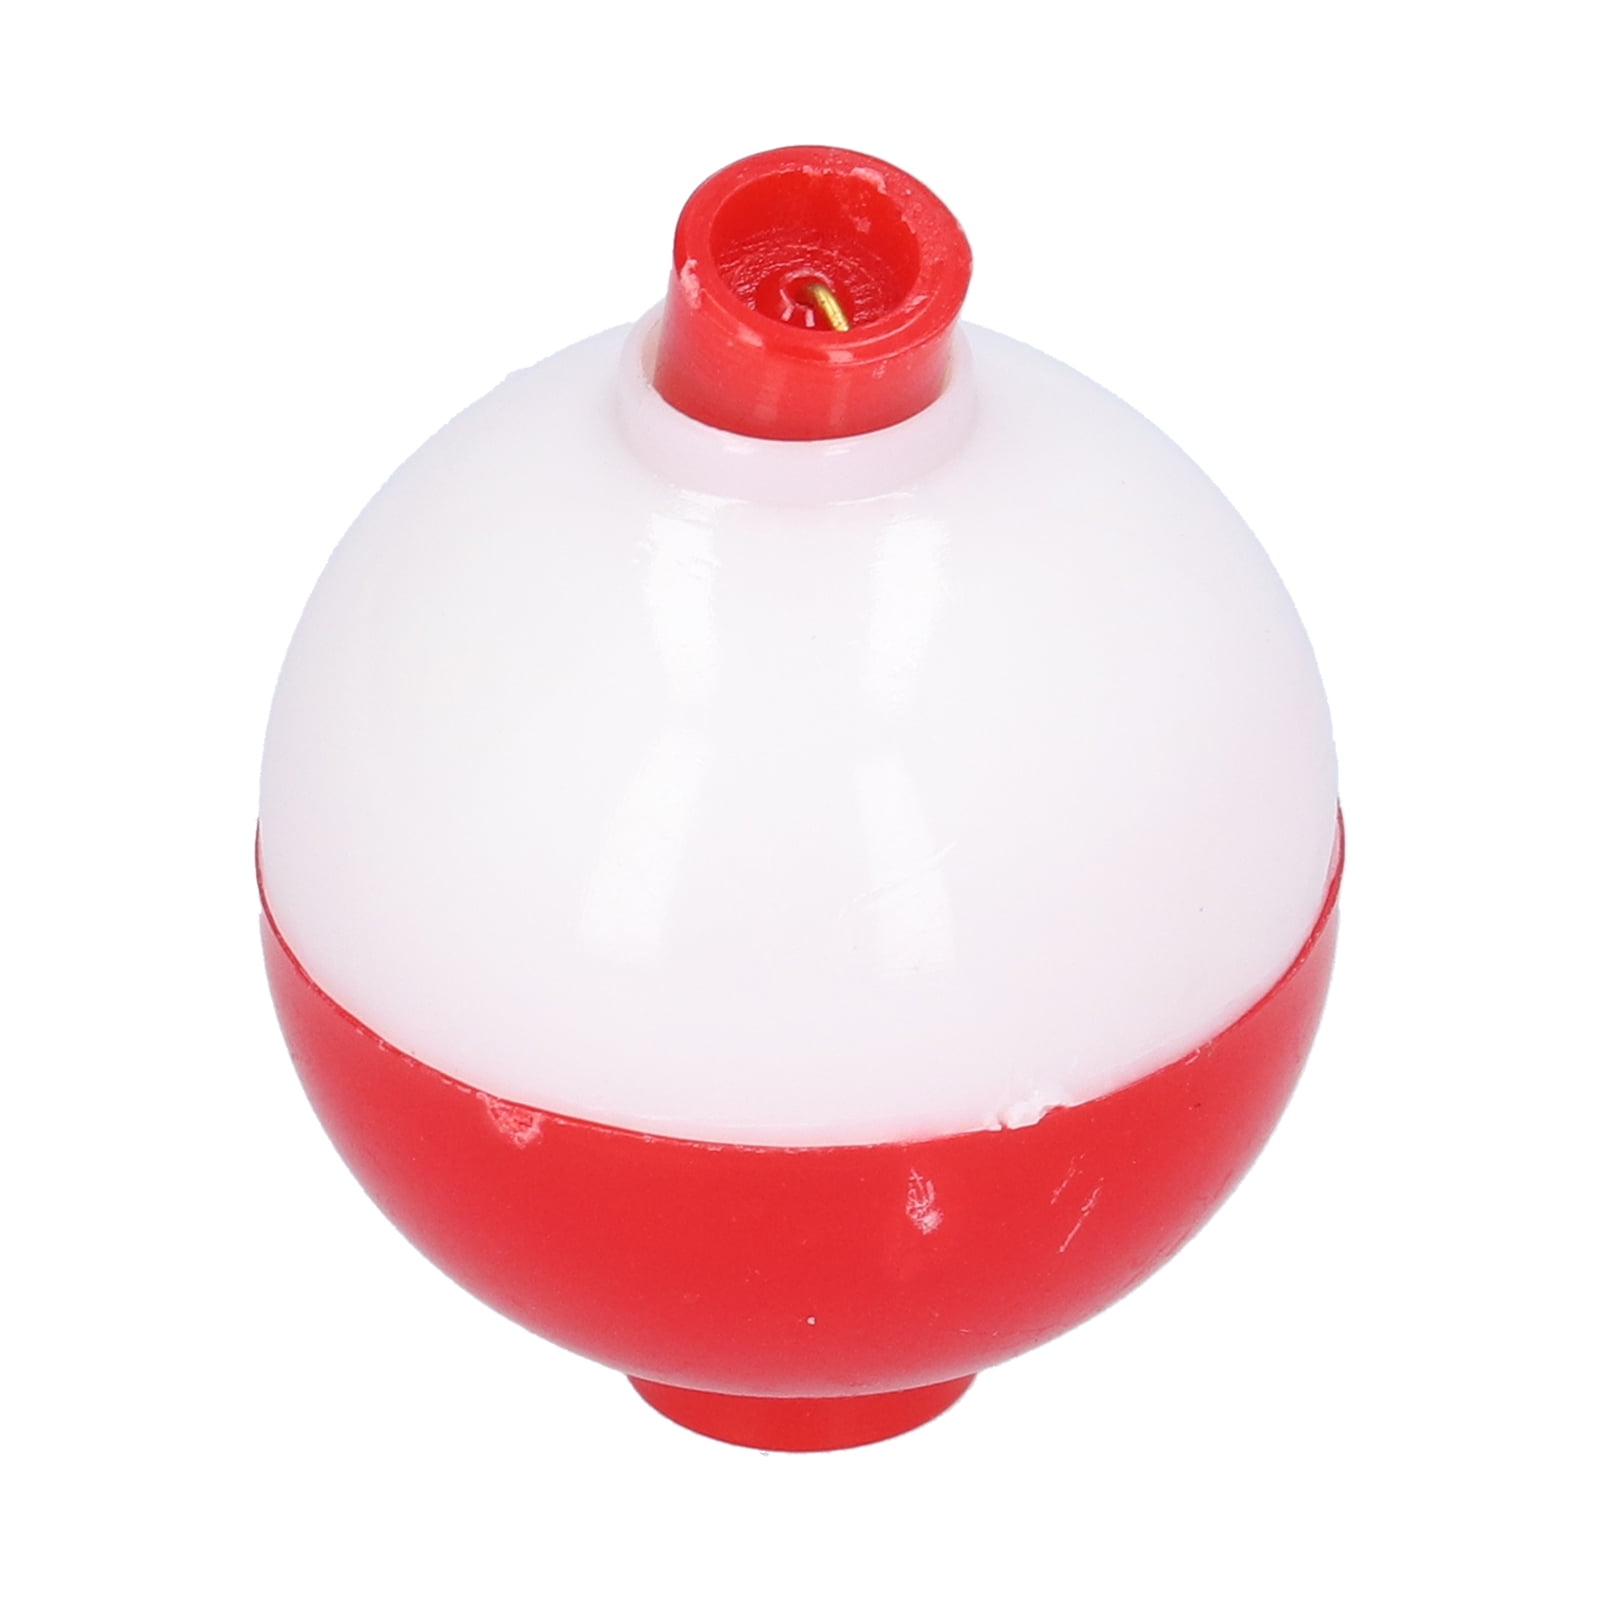 12 1 inch" FISHING BOBBERS Round Weighted Floats Red White Foam SNAP ON FLOAT 